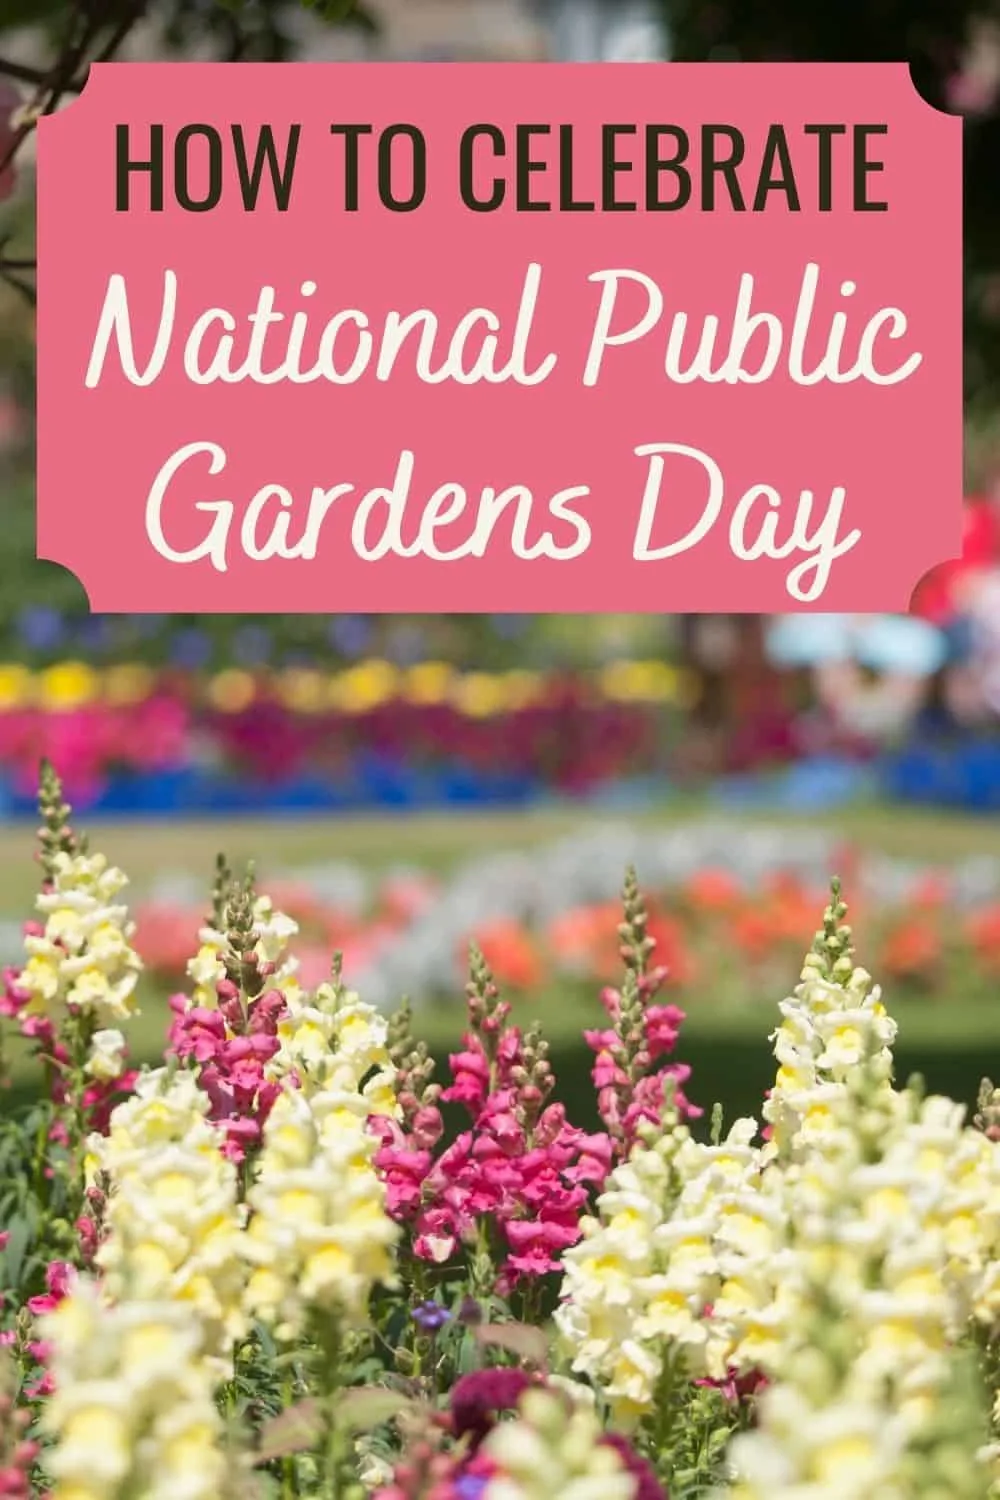 How to celebrate National Public Gardens Day